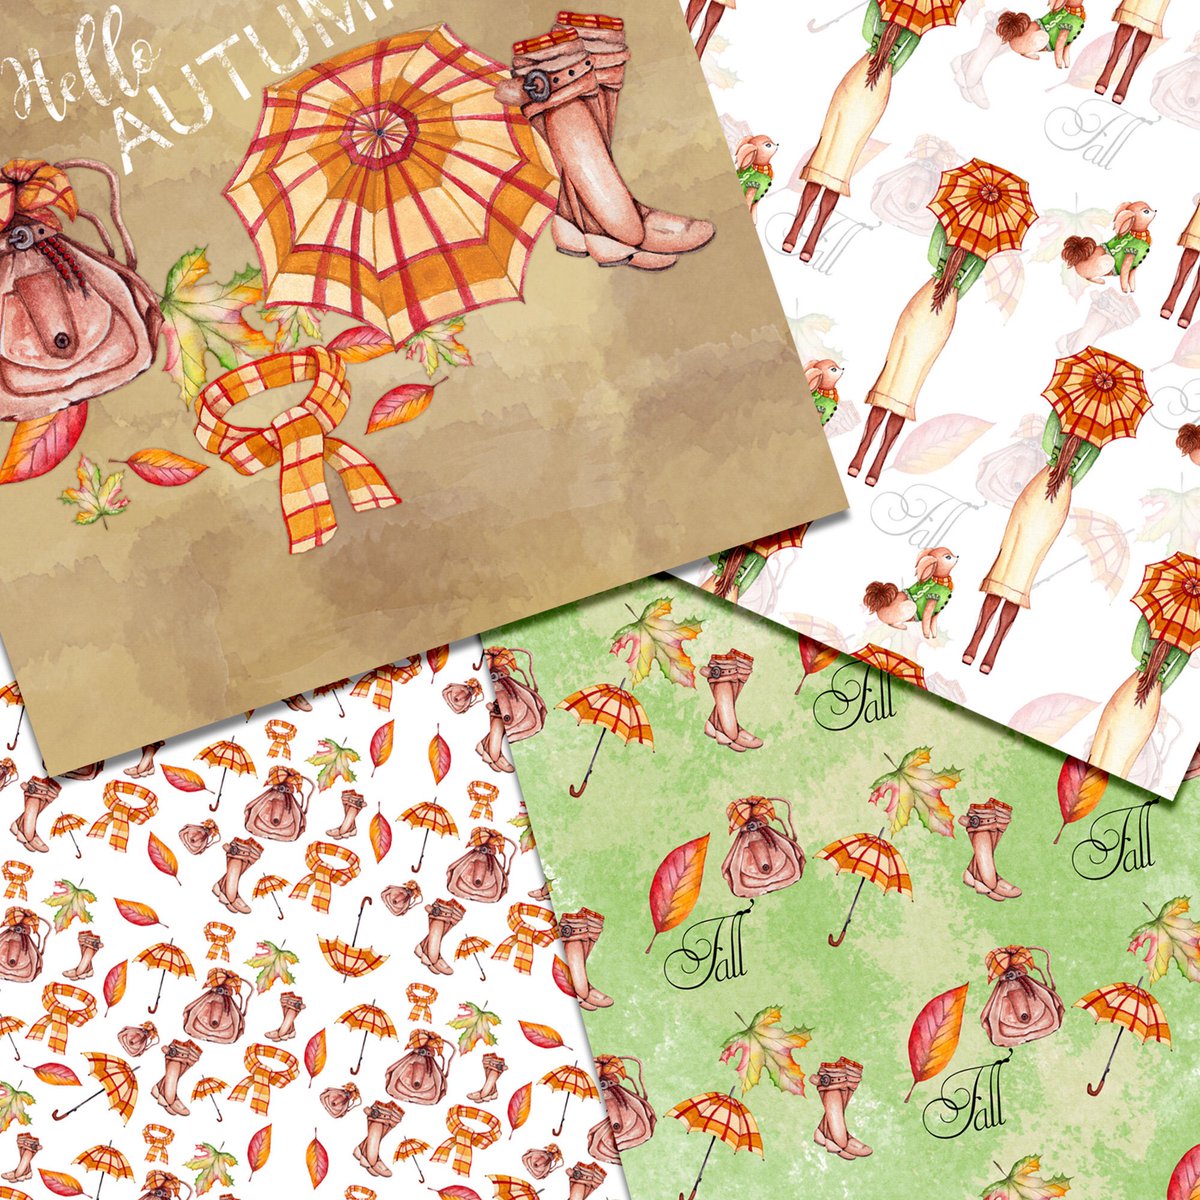 Excited to share this item from my #etsy shop: Fall digital paper pack, Planner stickers fashion girl, Autumn watercolor background, Scrapbook umbrella dog and bag fall boots fall scarf #orange #animalprint #inaartsstudio etsy.me/339Qi2Y #fall #Autumn #dog #woman